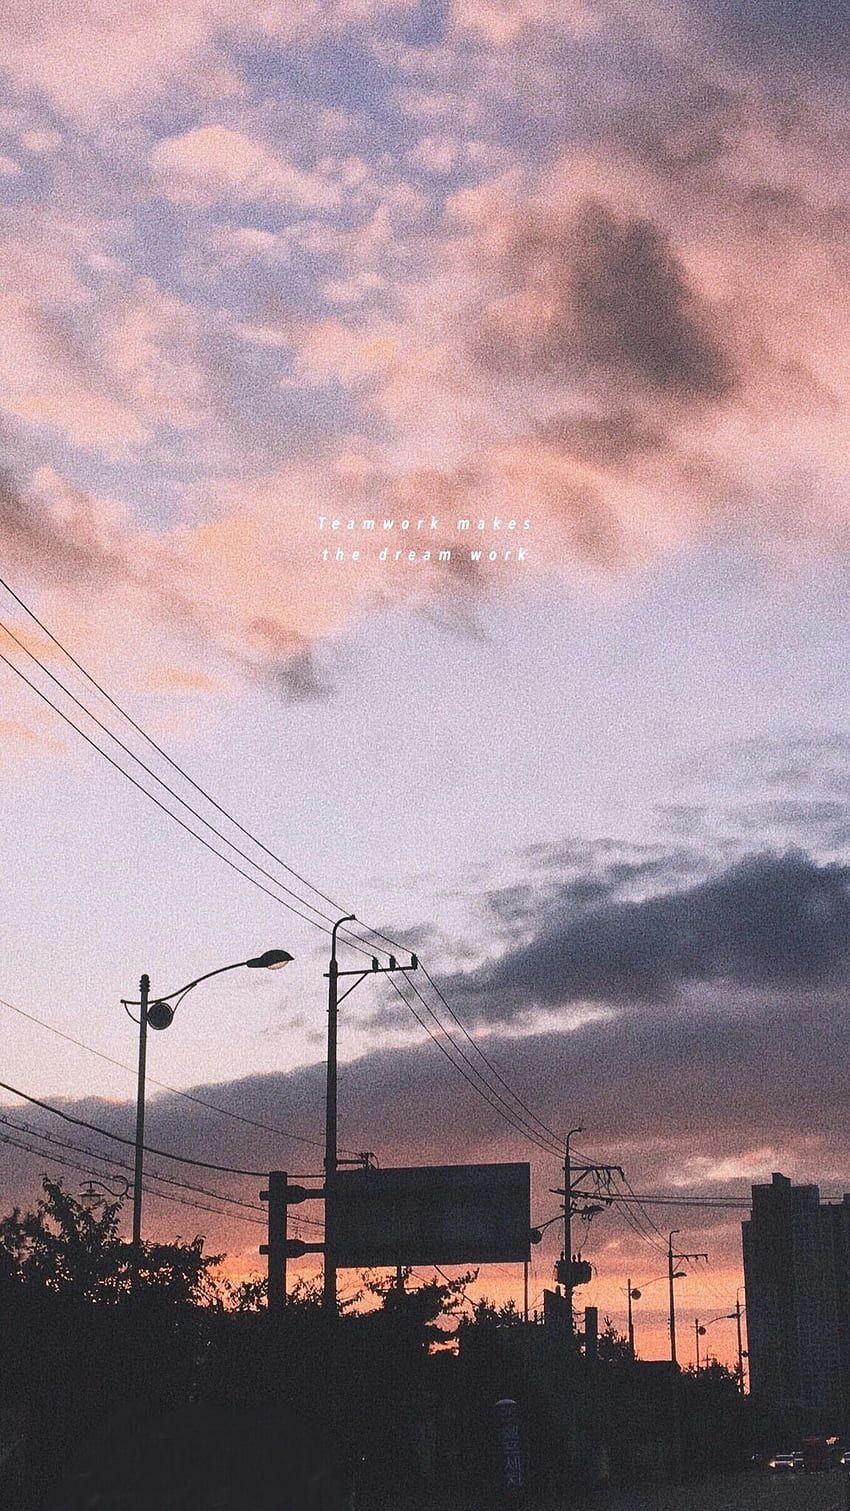 Aesthetic phone wallpaper of a sunset - Scenery